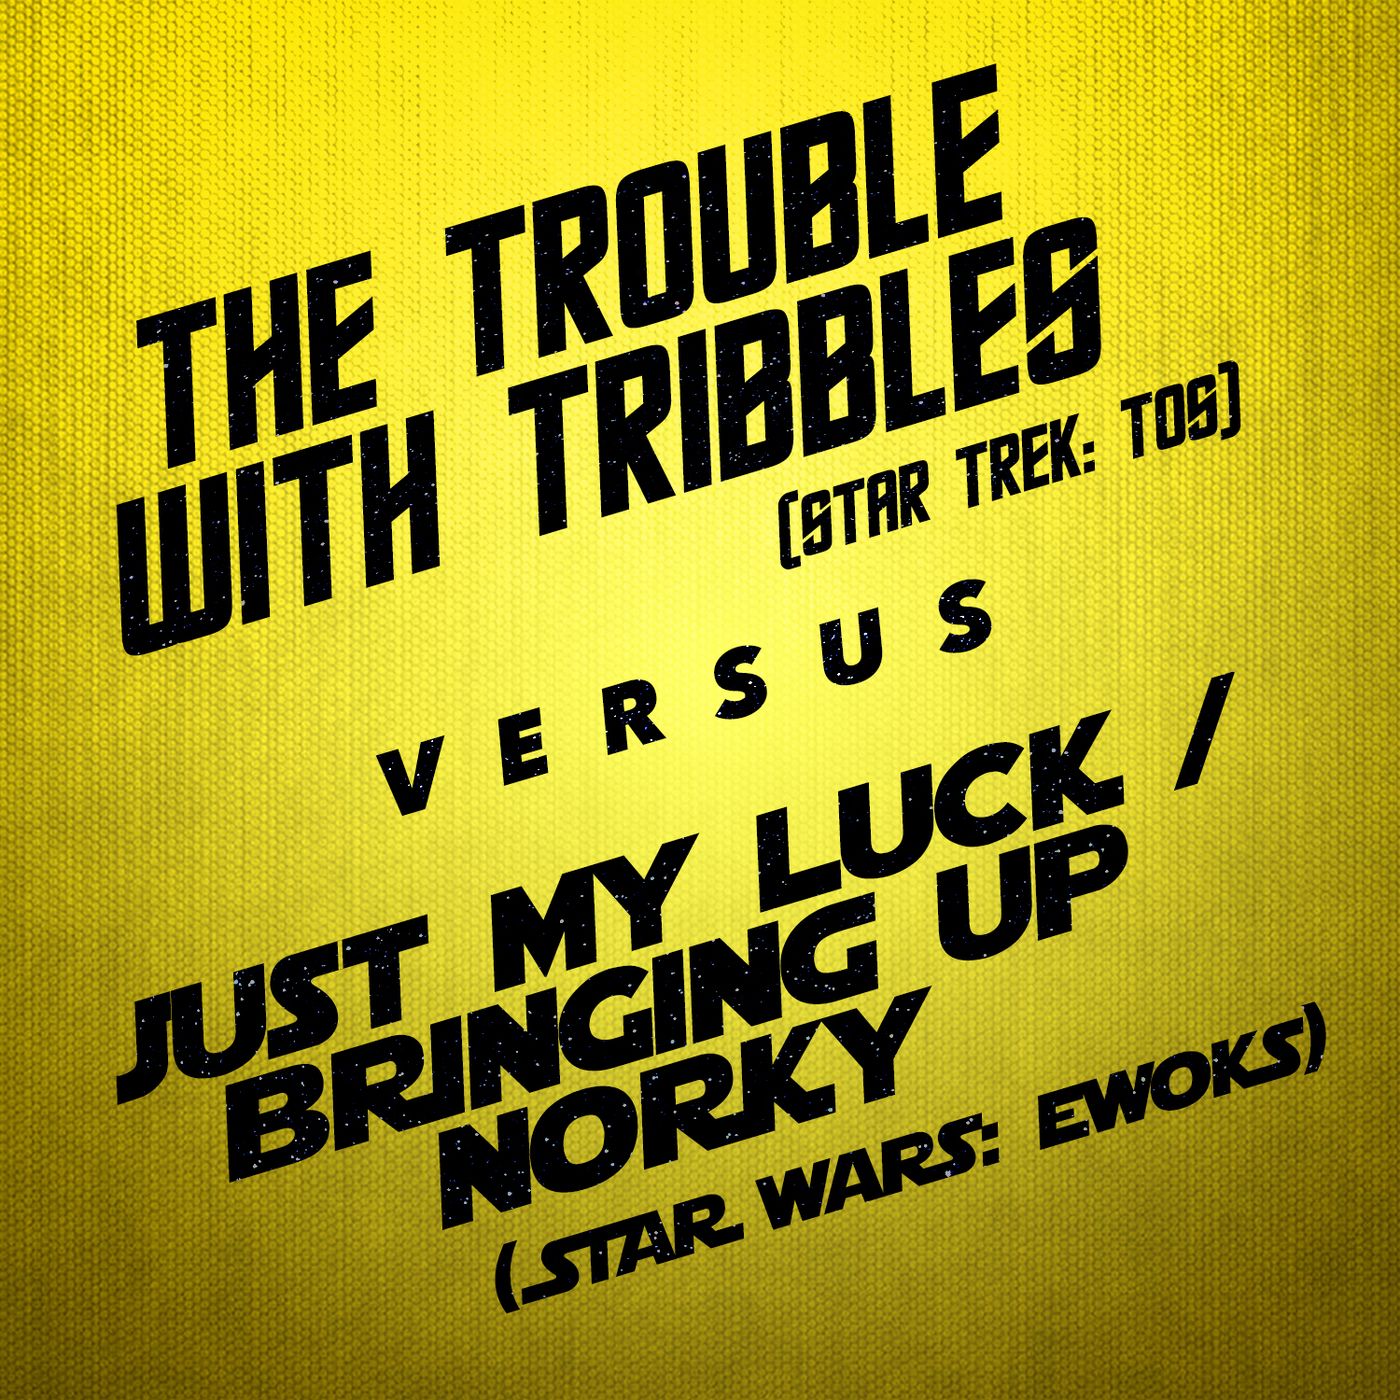 The Trouble with Tribbles vs. Just My Luck/Bringing Up Norky